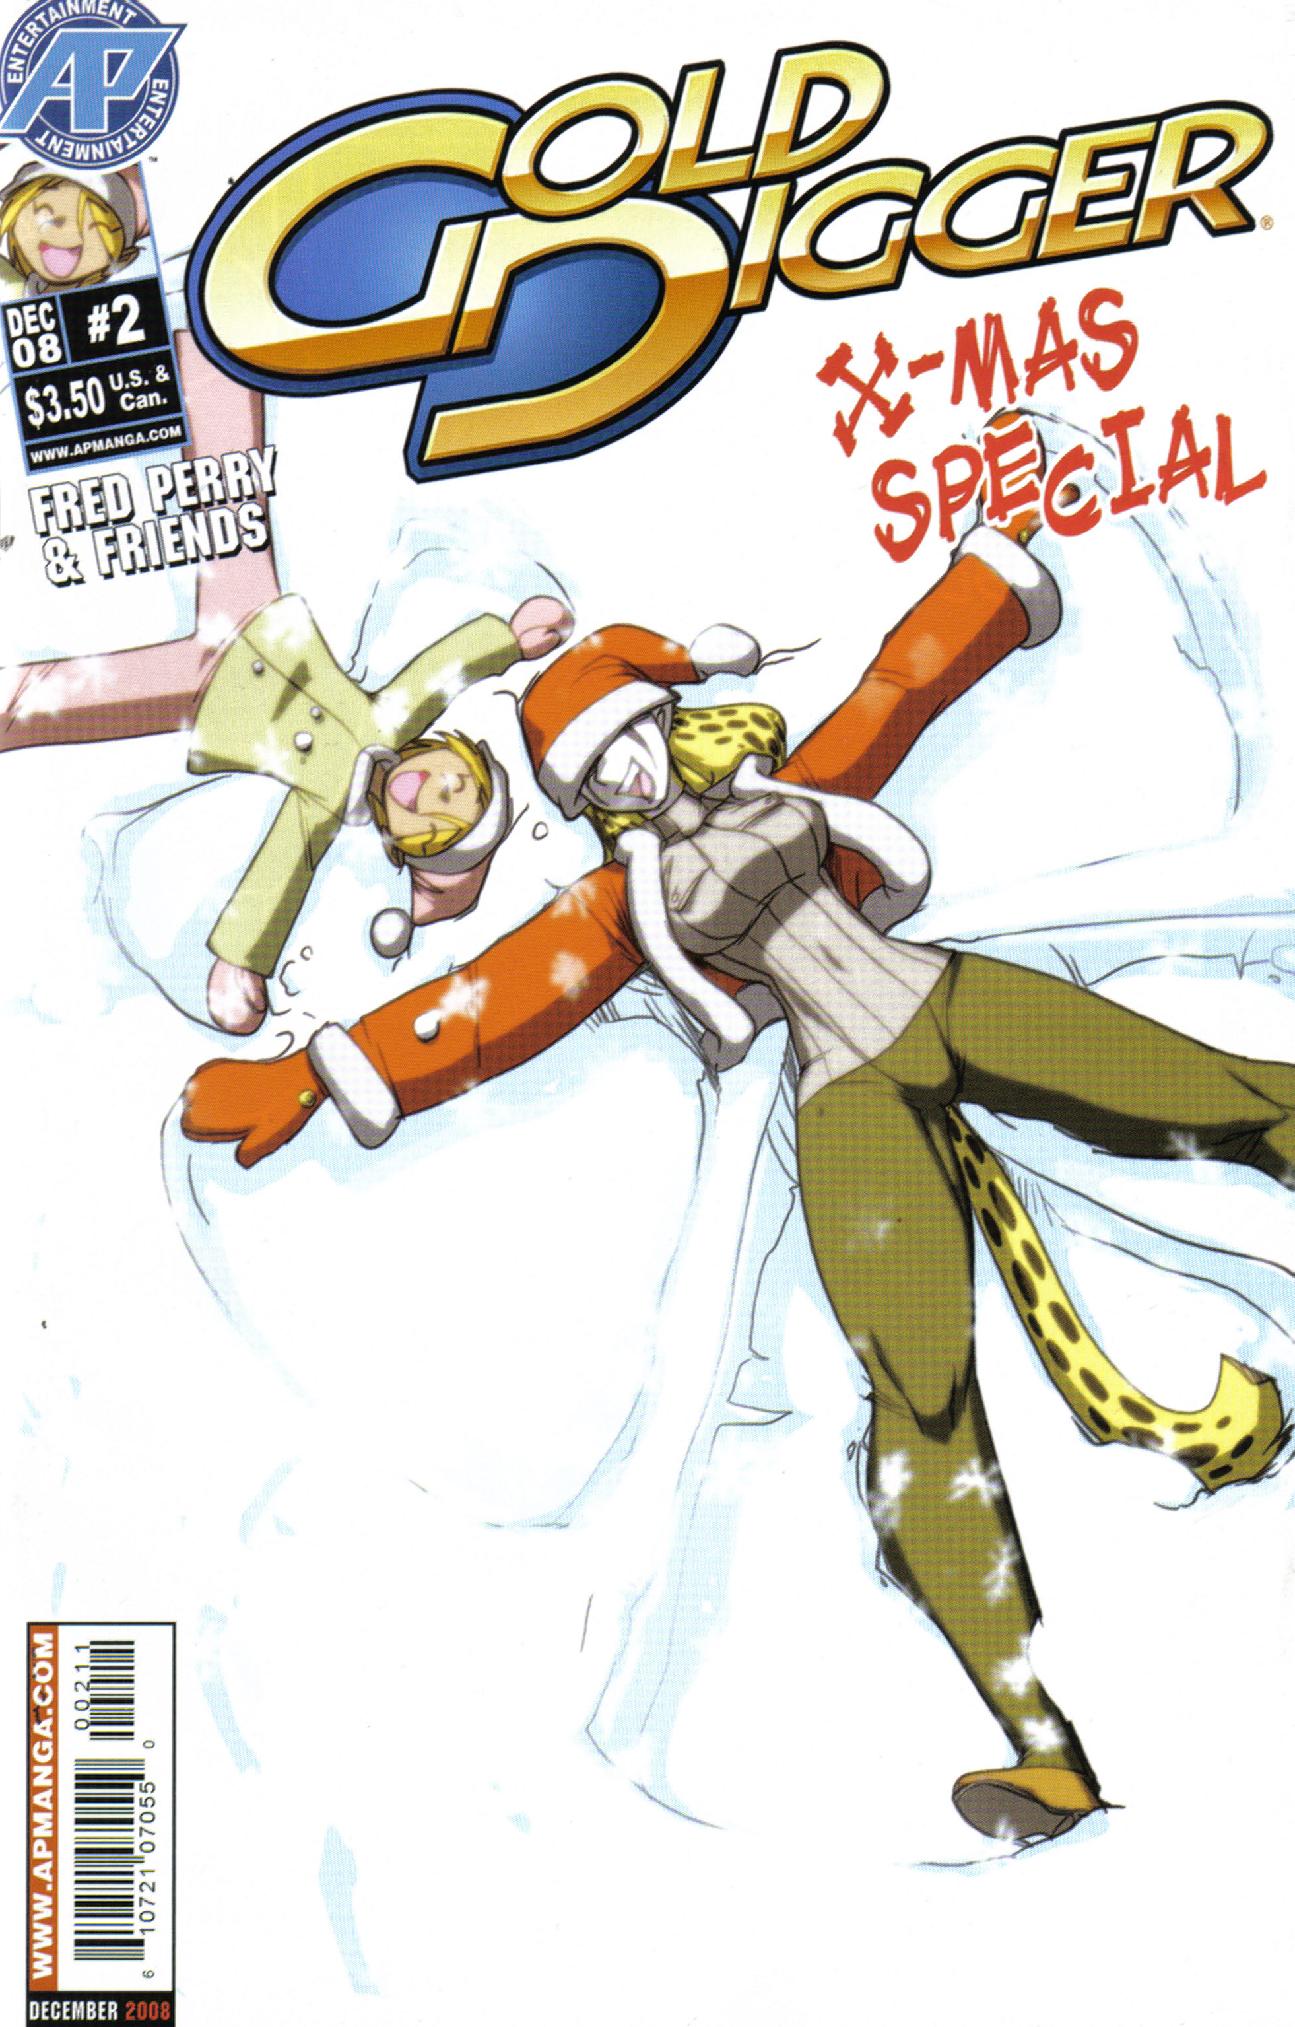 Read online Gold Digger X-Mas Special comic -  Issue #2 - 1